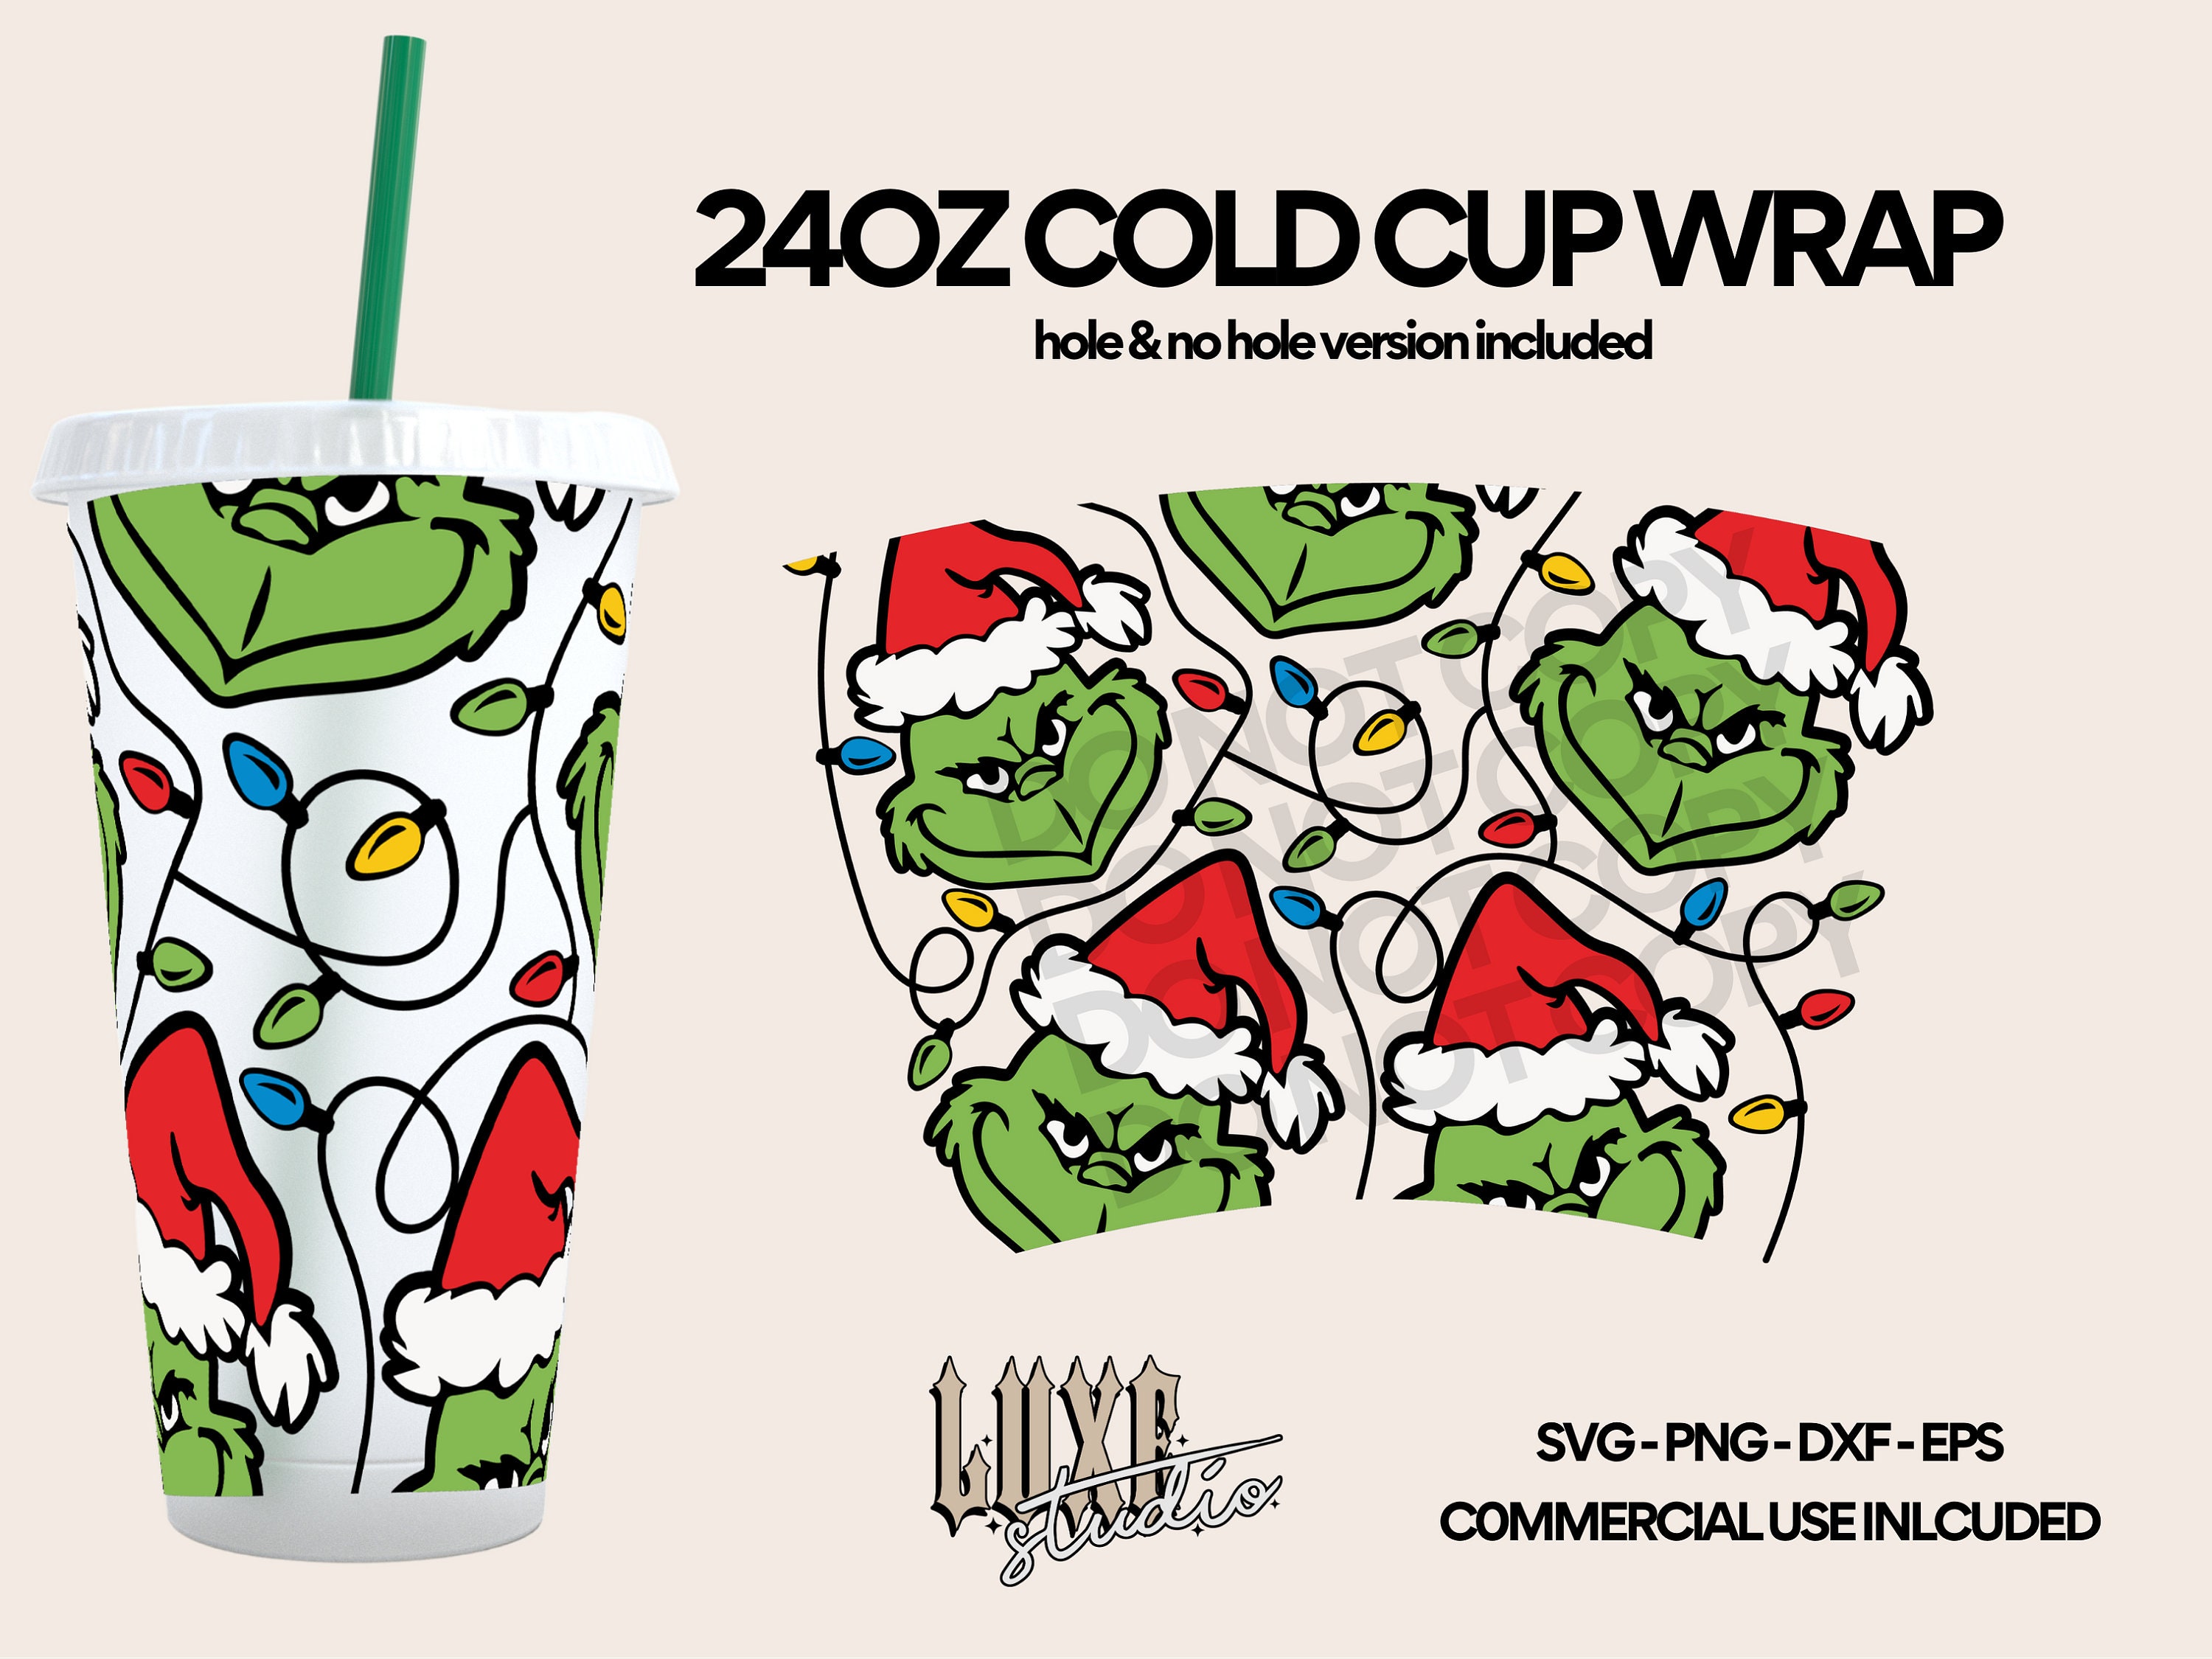 Dottie Digitals - Marshmallow Charms 24oz Starbucks No Hole Double Wall  Acrylic Tumbler Wrap SVG PNG DXF Cup Cutting File